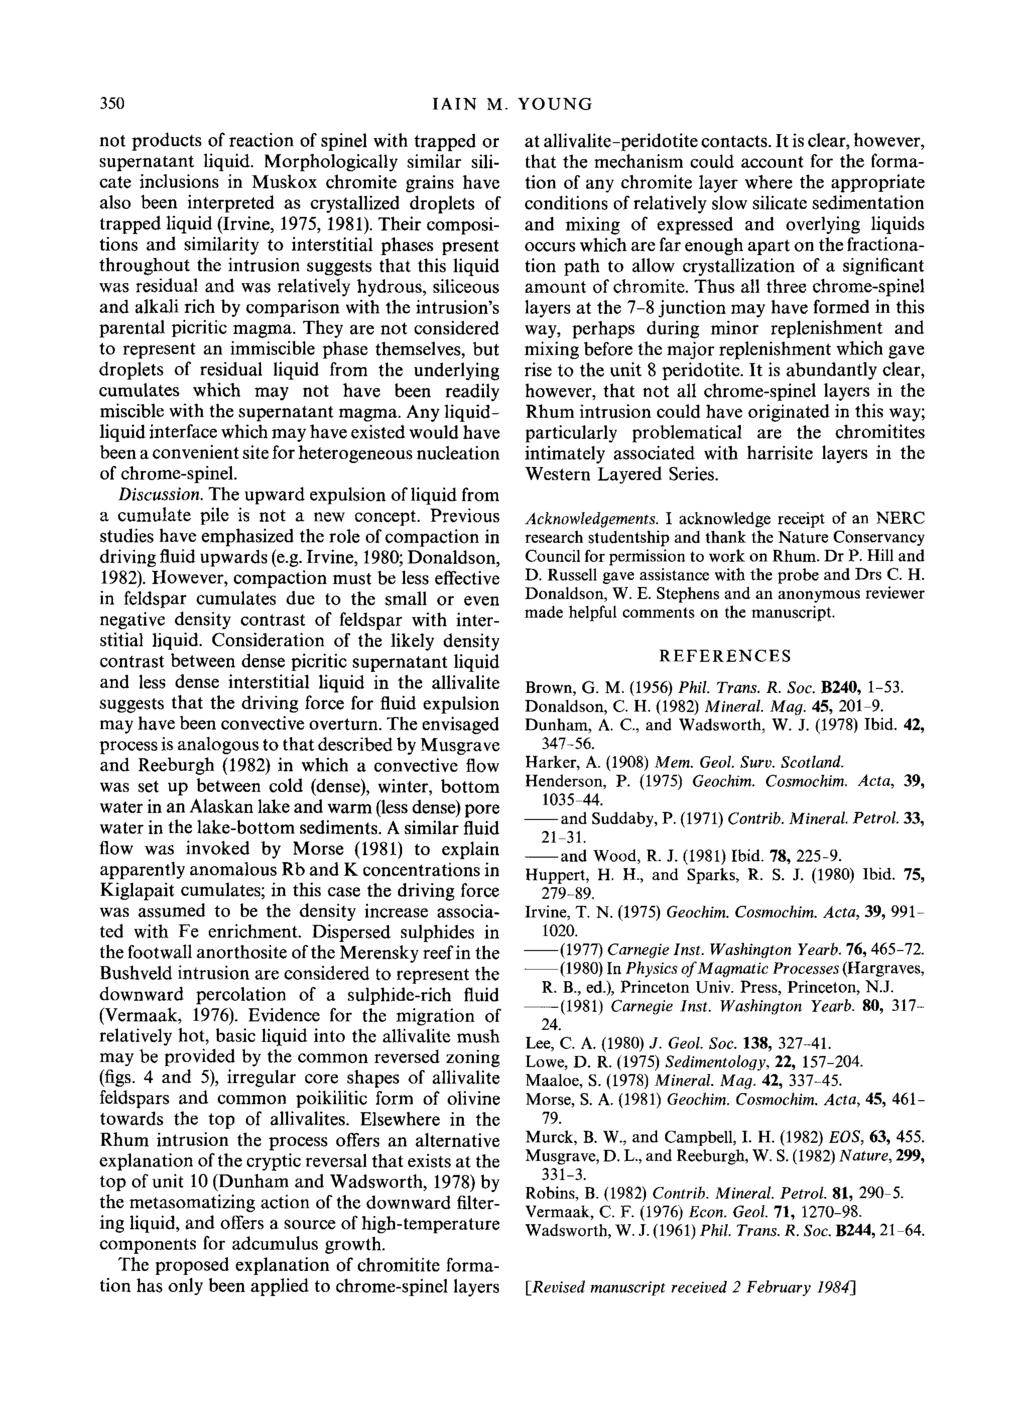 350 IAIN M. YOUNG not products of reaction of spinel with trapped or supernatant liquid.